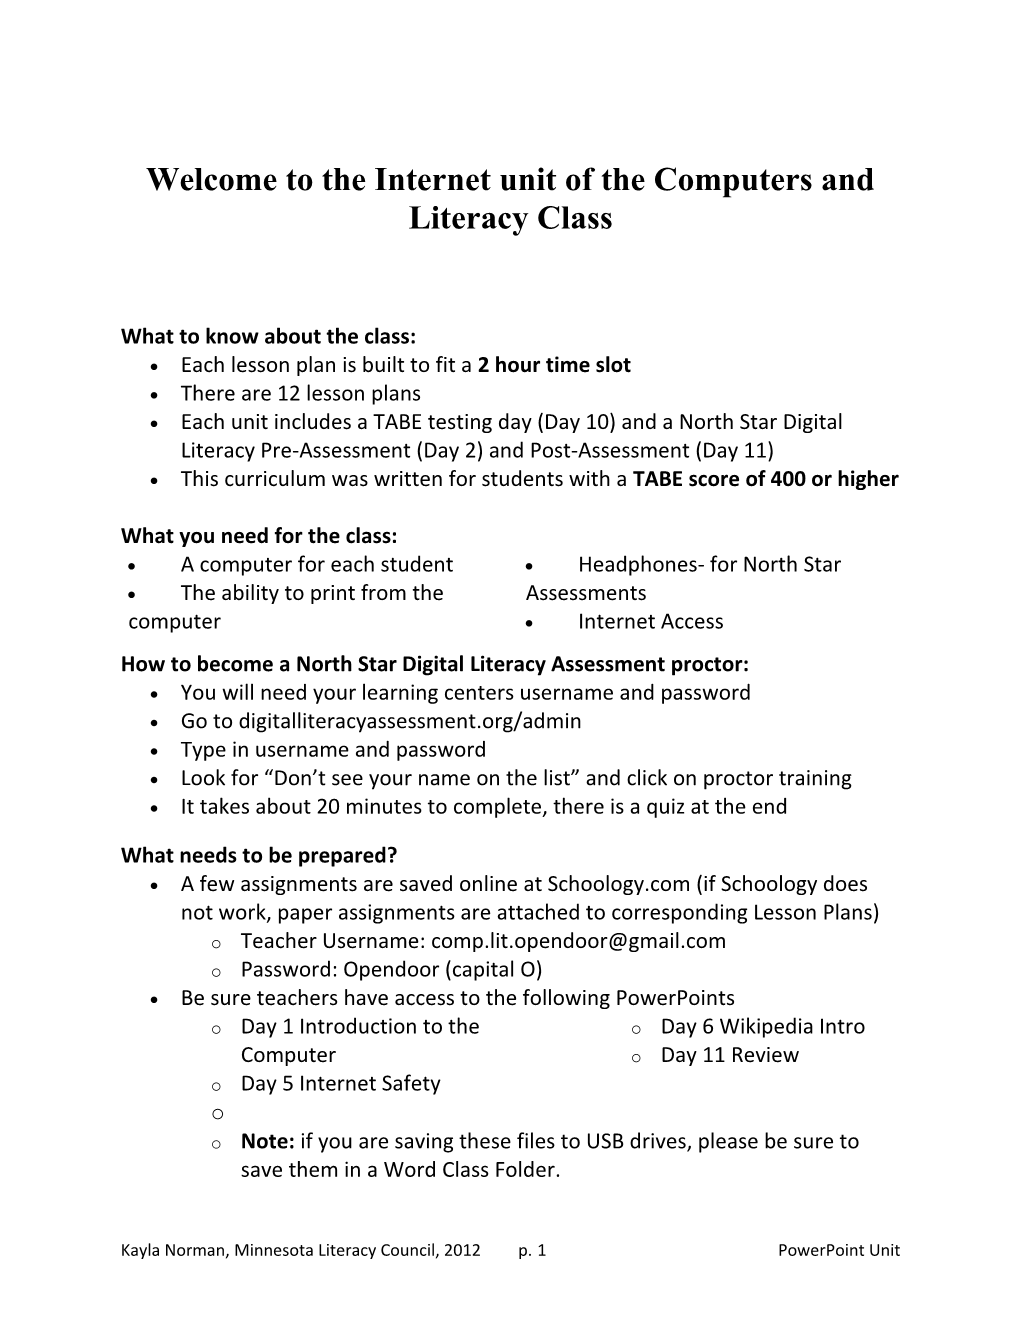 Welcome to the Internet Unit of the Computers and Literacy Class